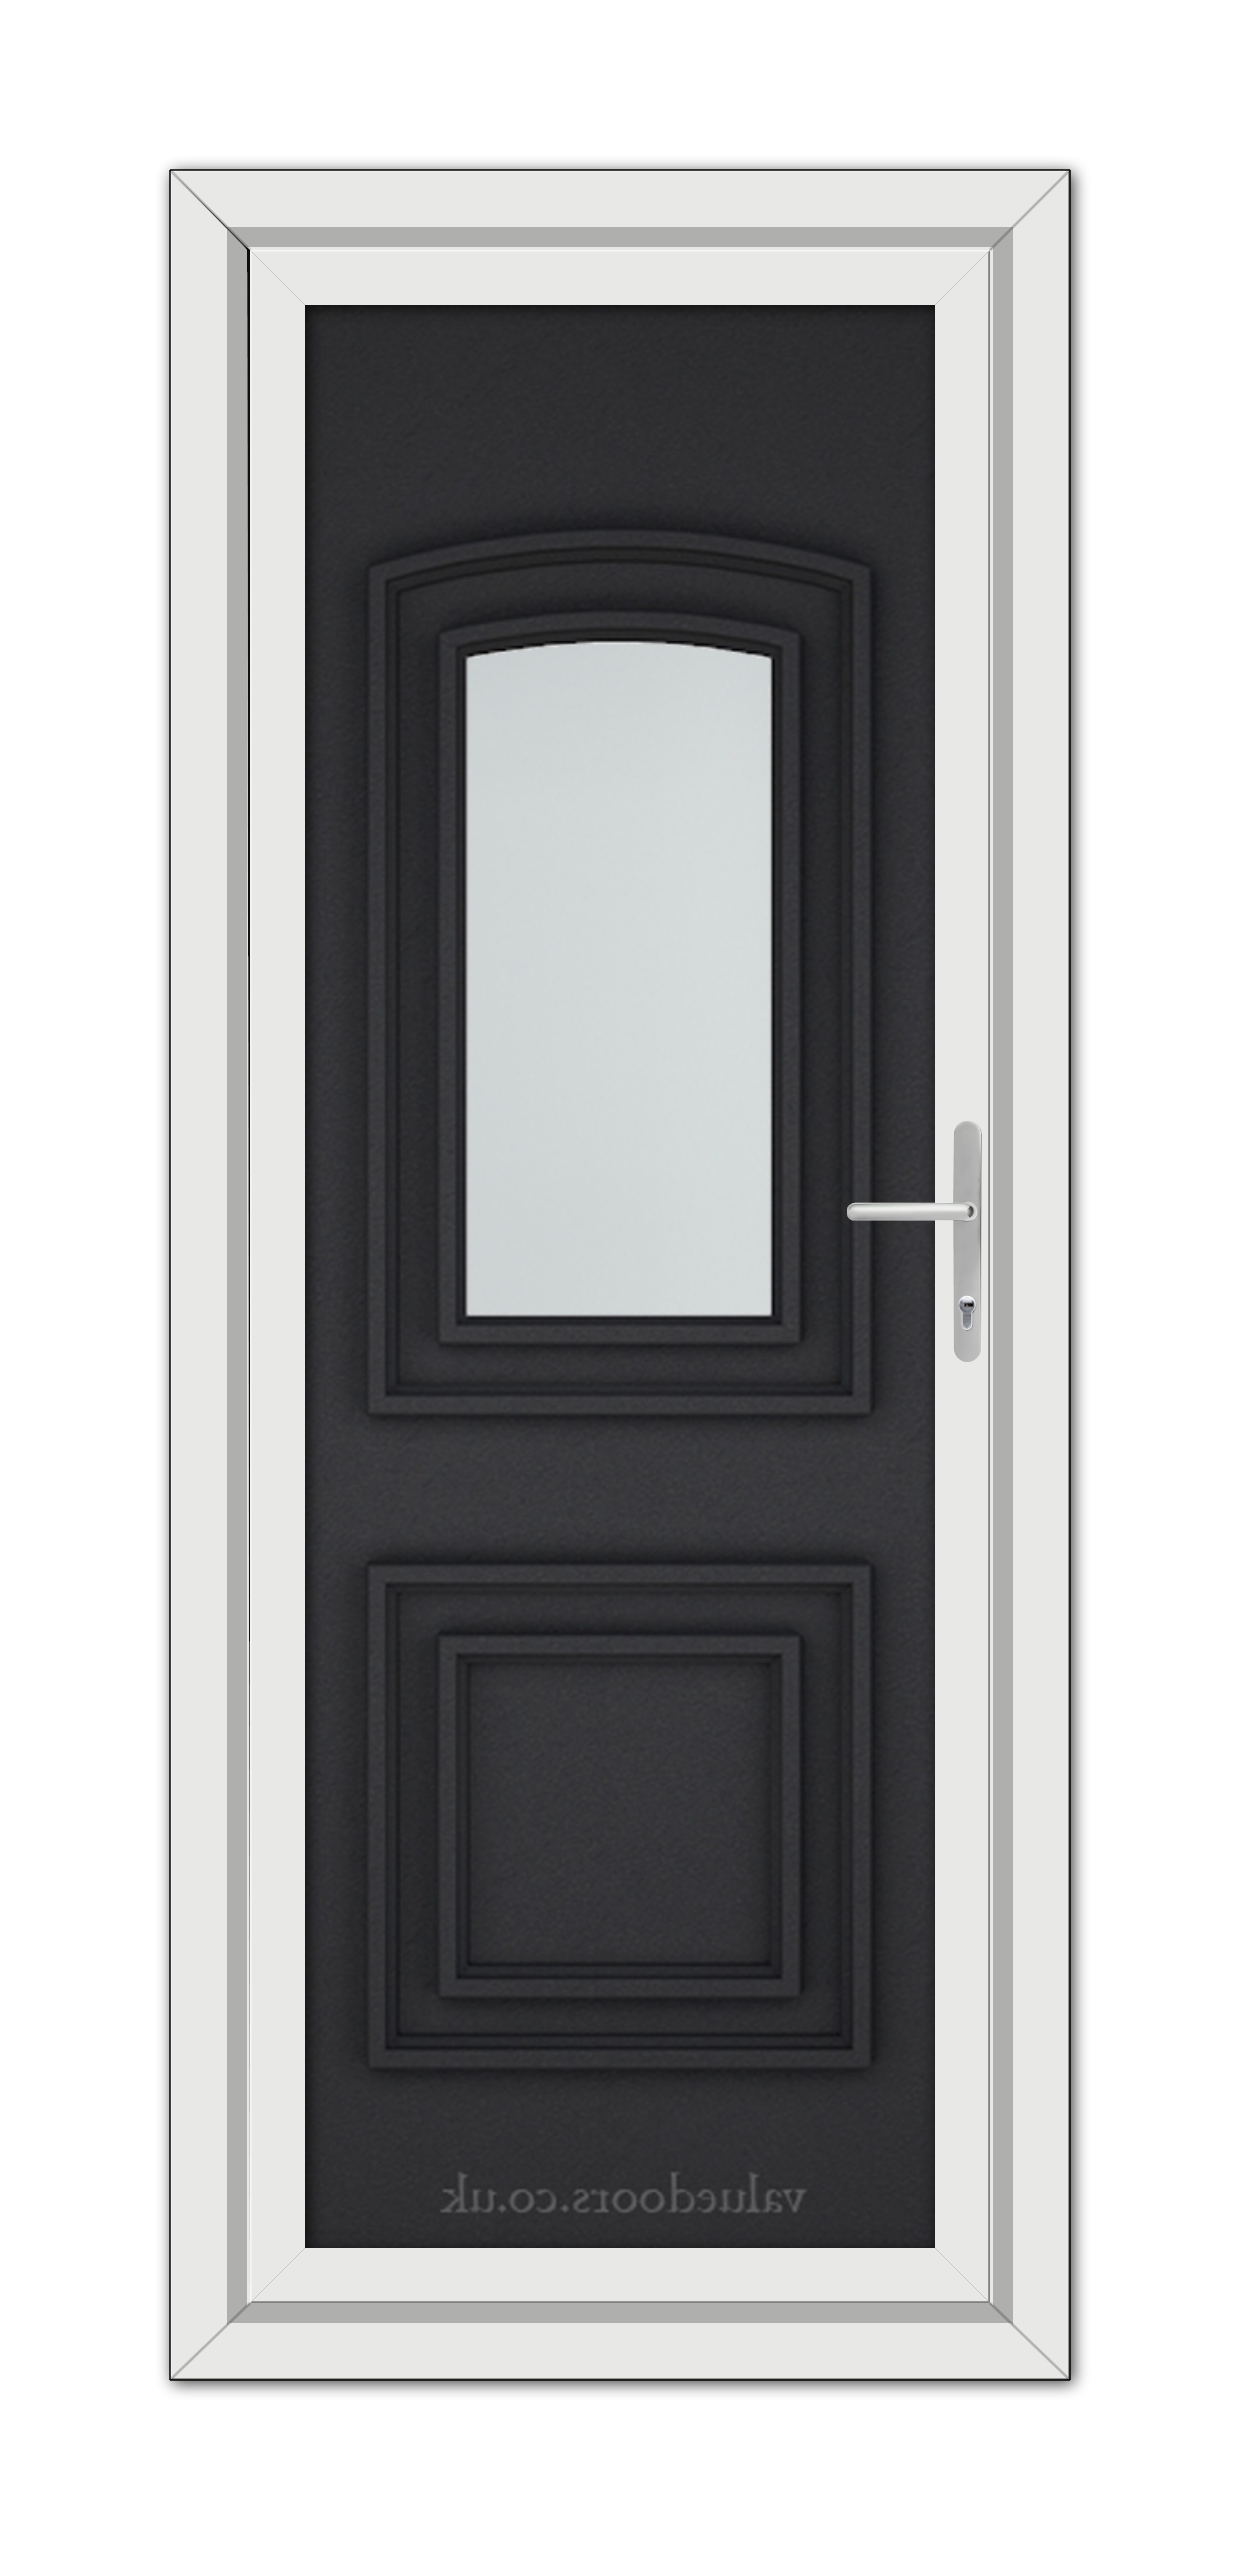 A modern Black Brown Balmoral One uPVC door with a vertical glass panel, framed by a white door frame. the door handle is on the left side.